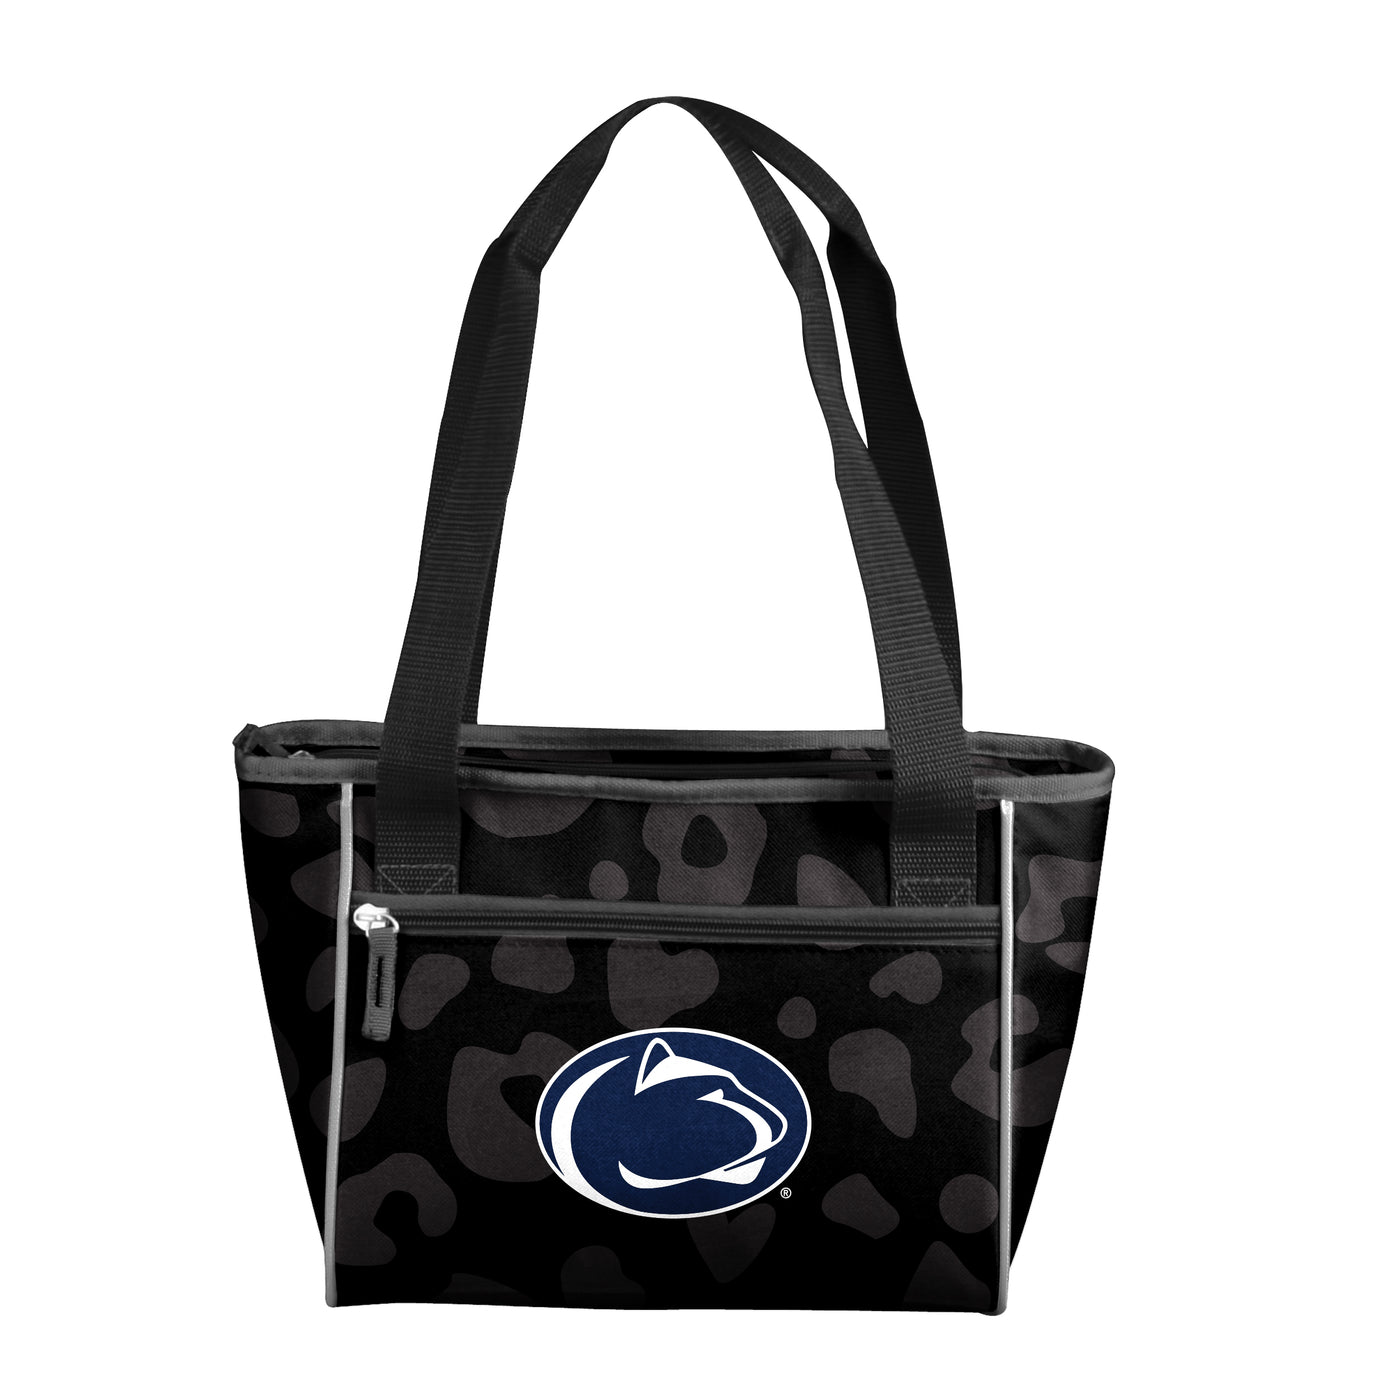 Penn State Leopard Print 16 Can Cooler Tote